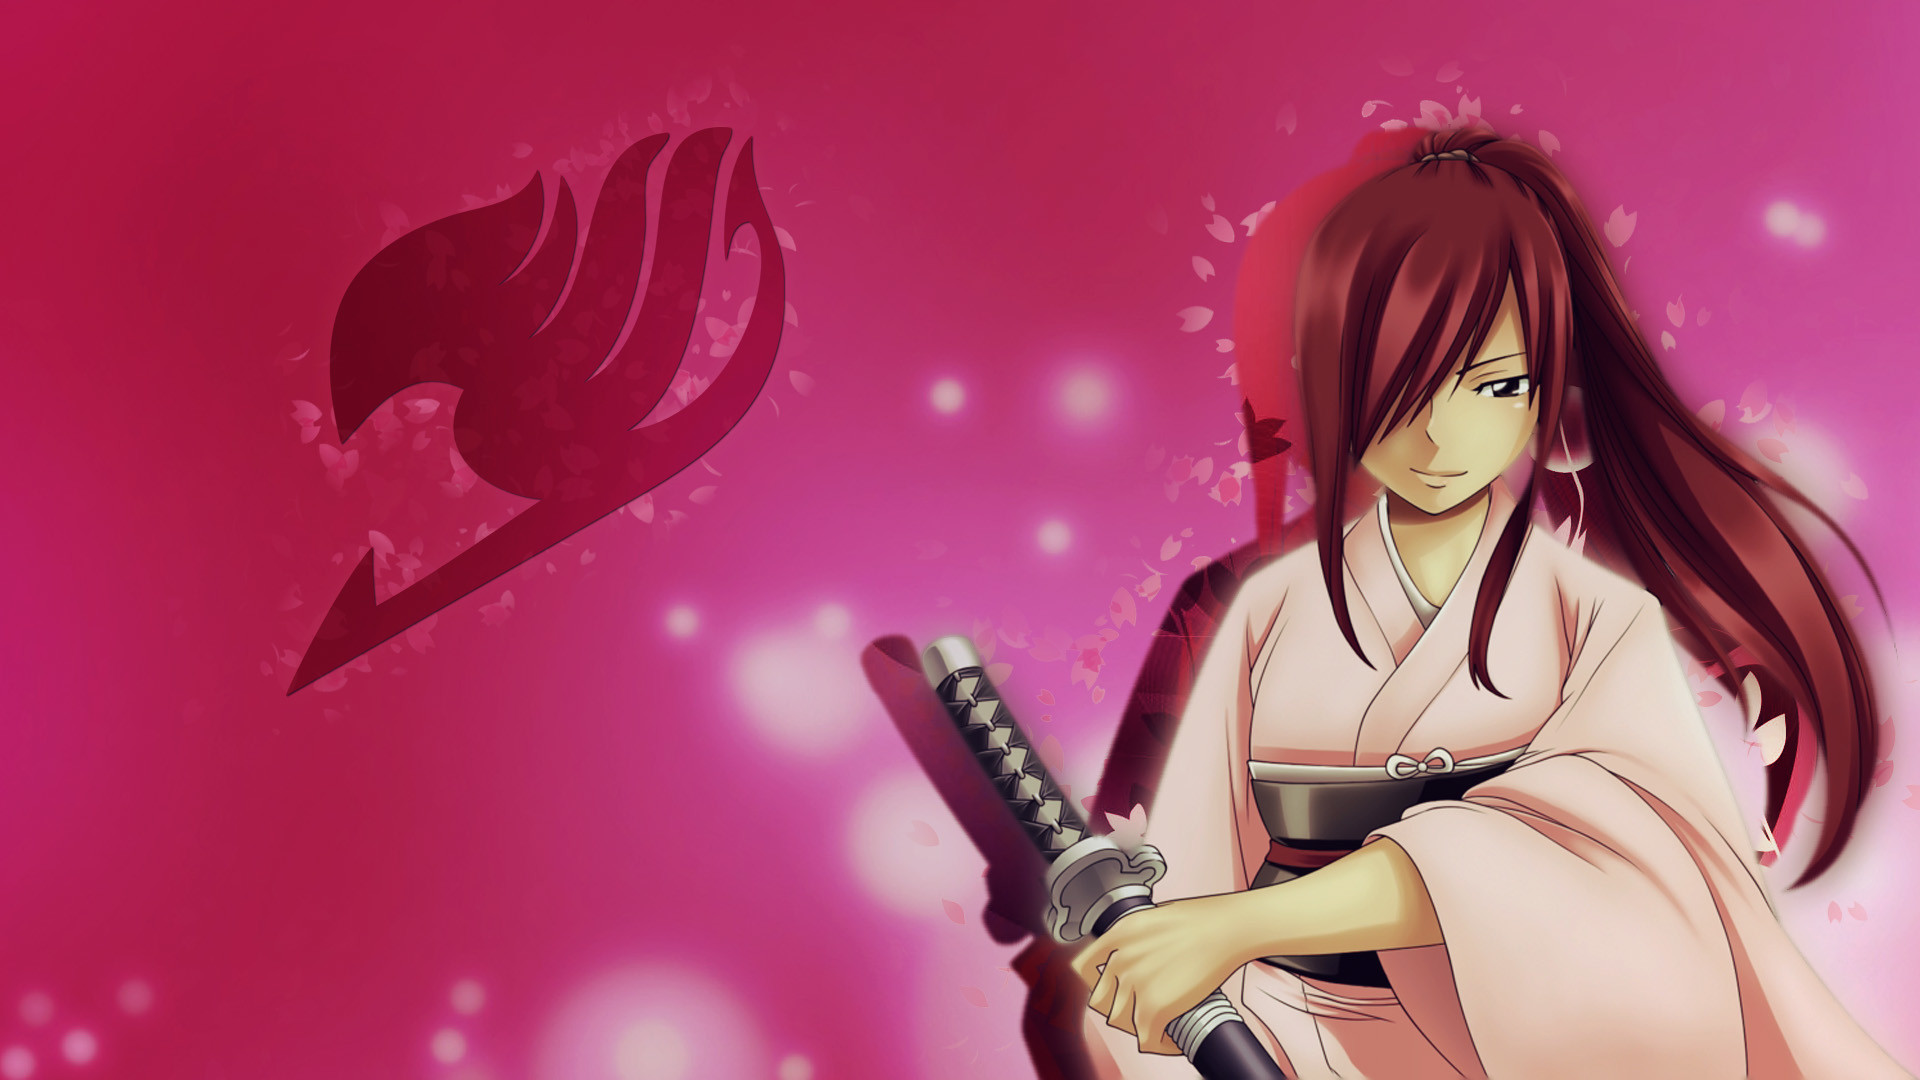 1920x1080  Wallpaper erza scarlet, fairy tail, mage, sword, art, anime